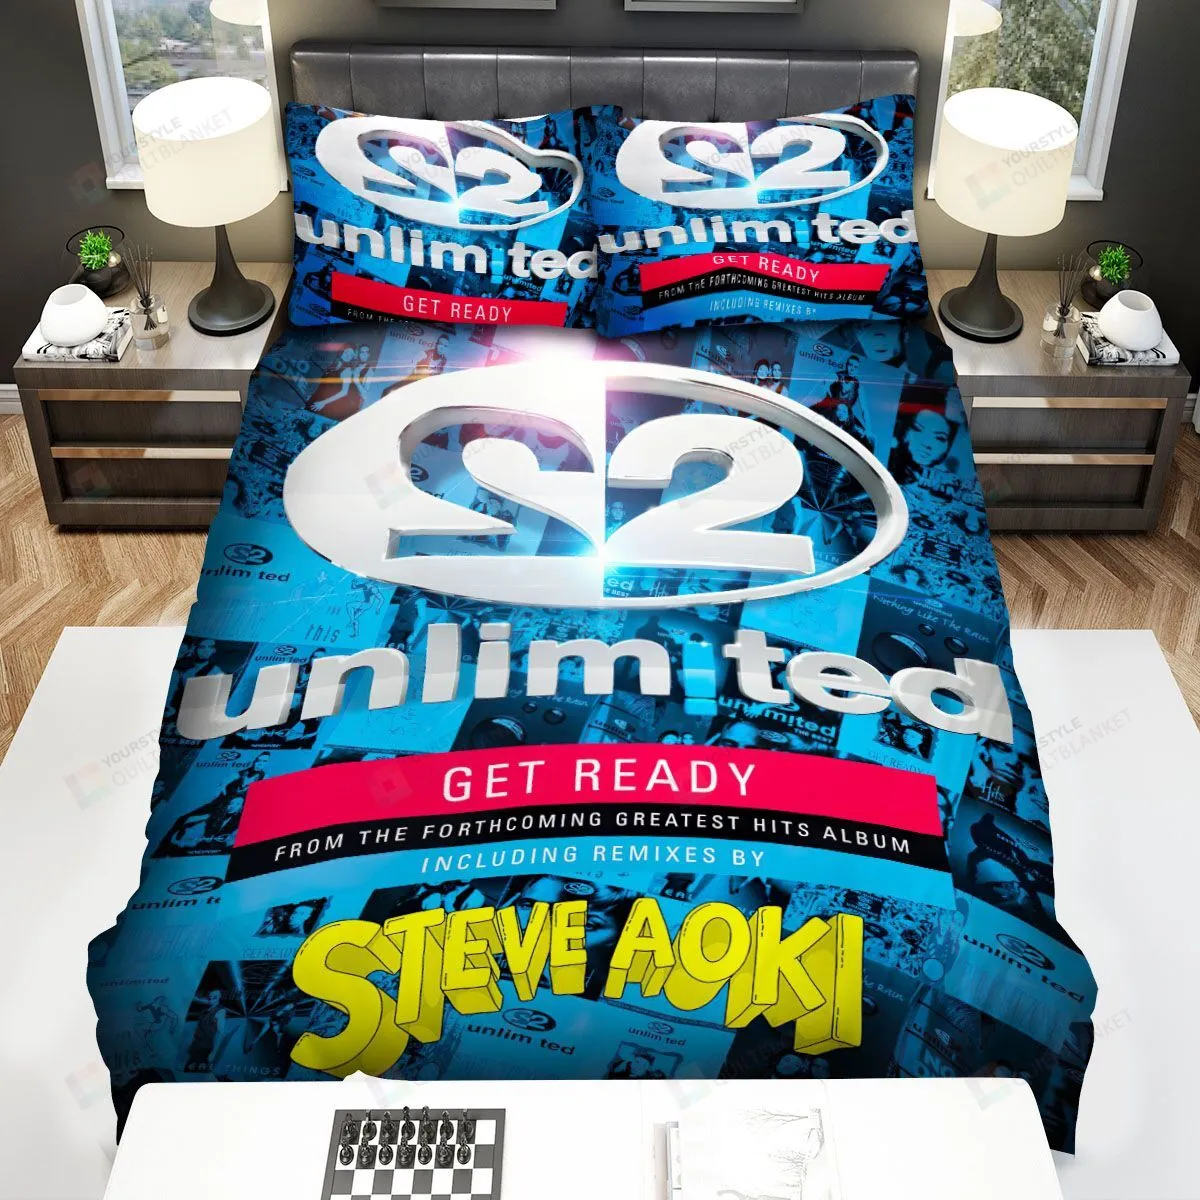 2 Unlimited Get Ready Art Bed Sheets Spread Comforter Duvet Cover Bedding Sets